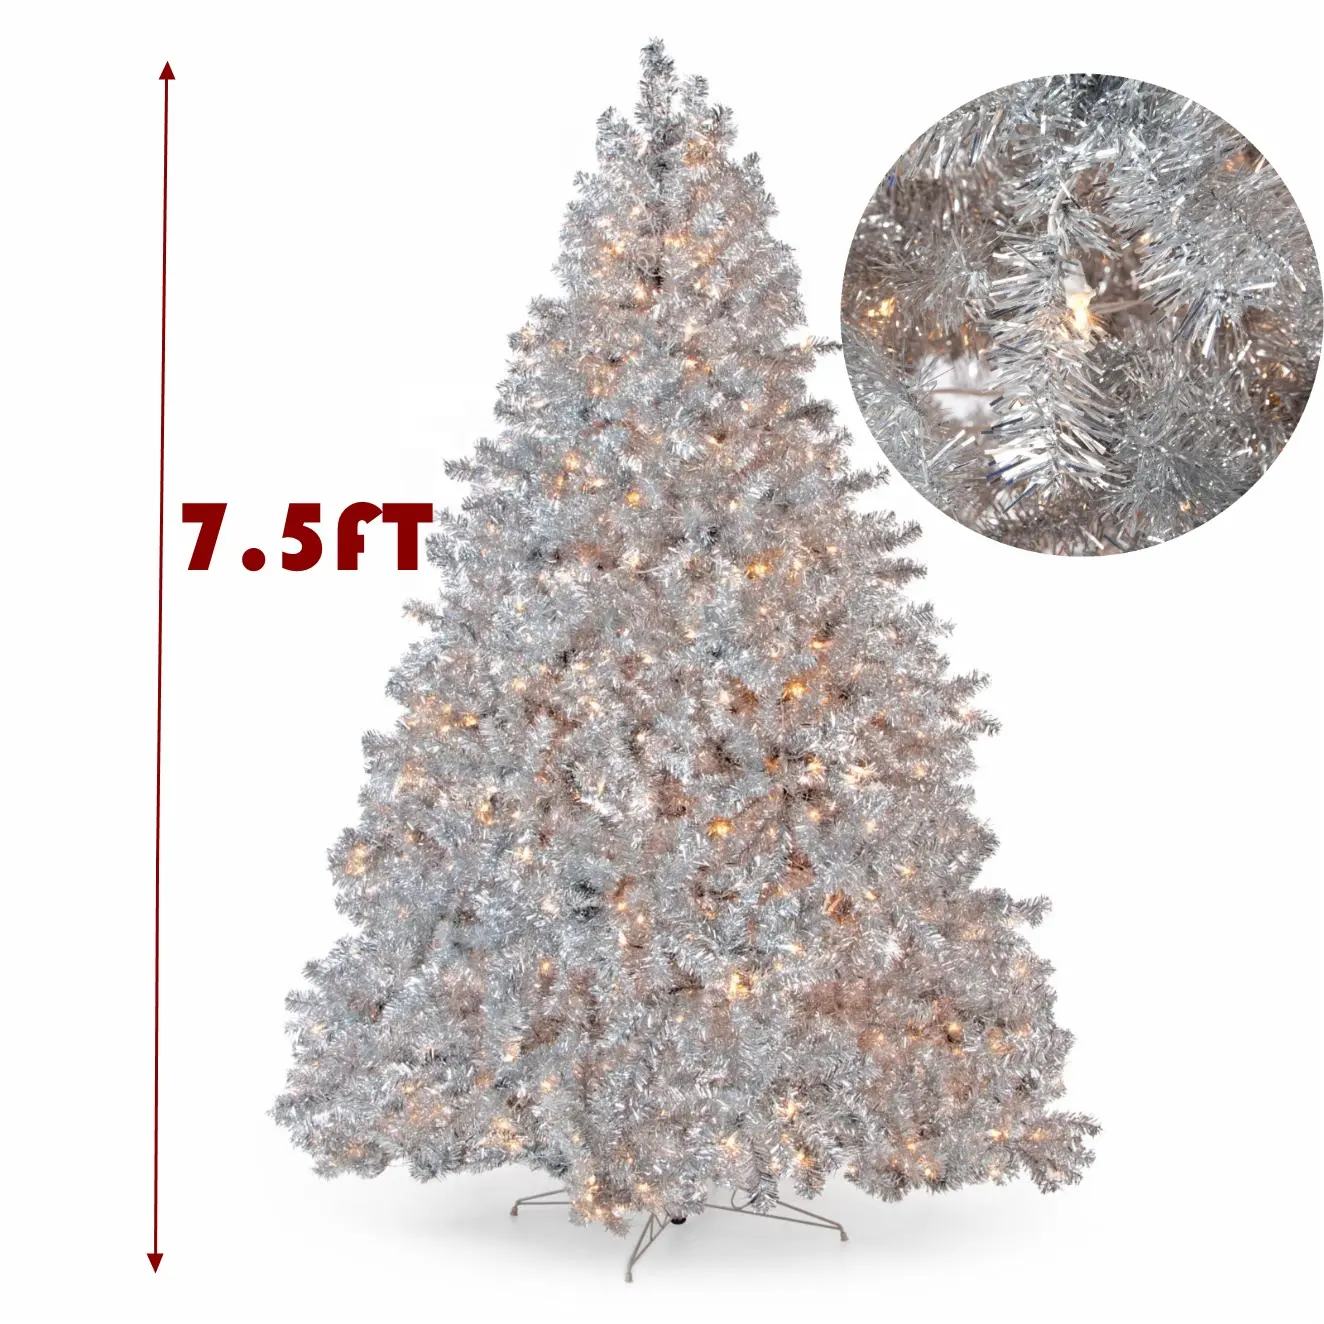 7.5ft durable PVC construction with a full pine silver tree shape big Christmas tree